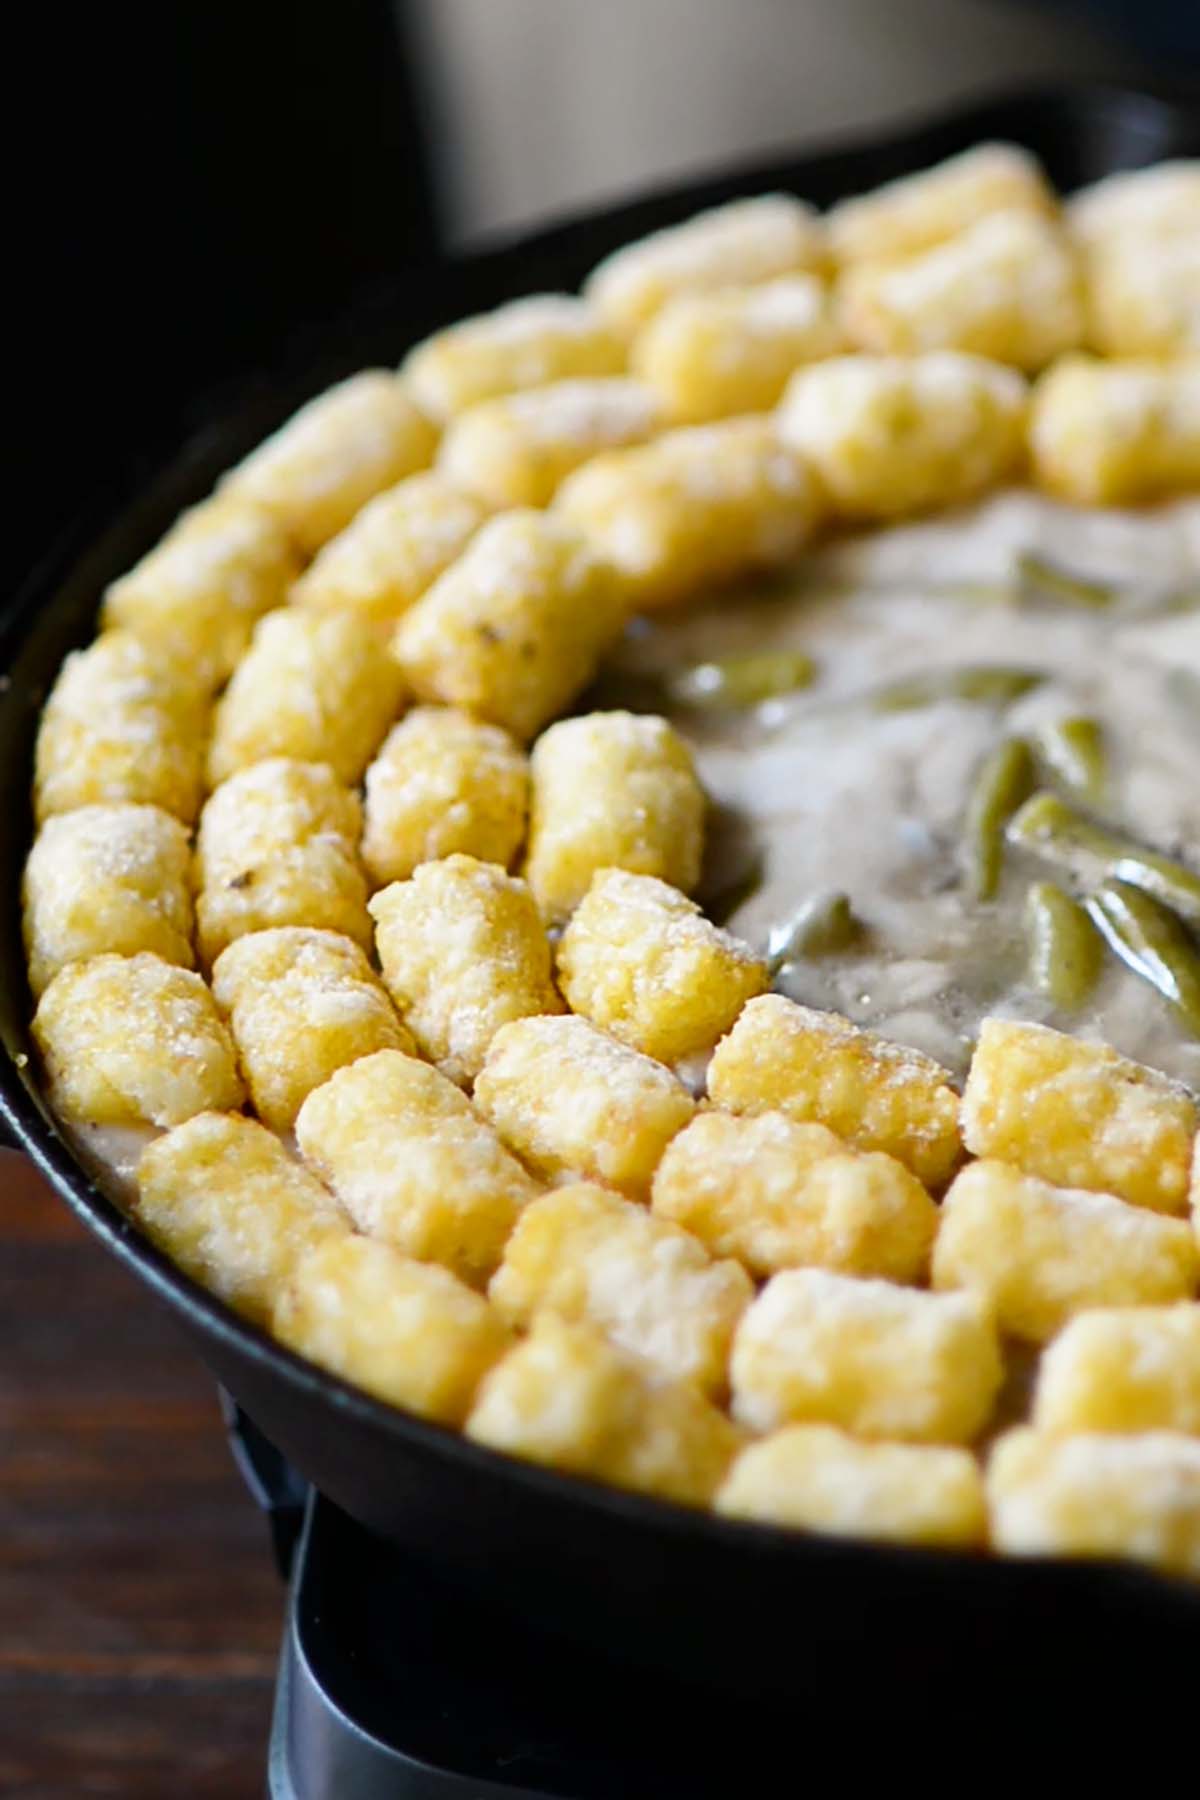 Tater tots being placed on top of canned green beans and cream of mushroom soup in a circular pattern around a cast iron skillet.